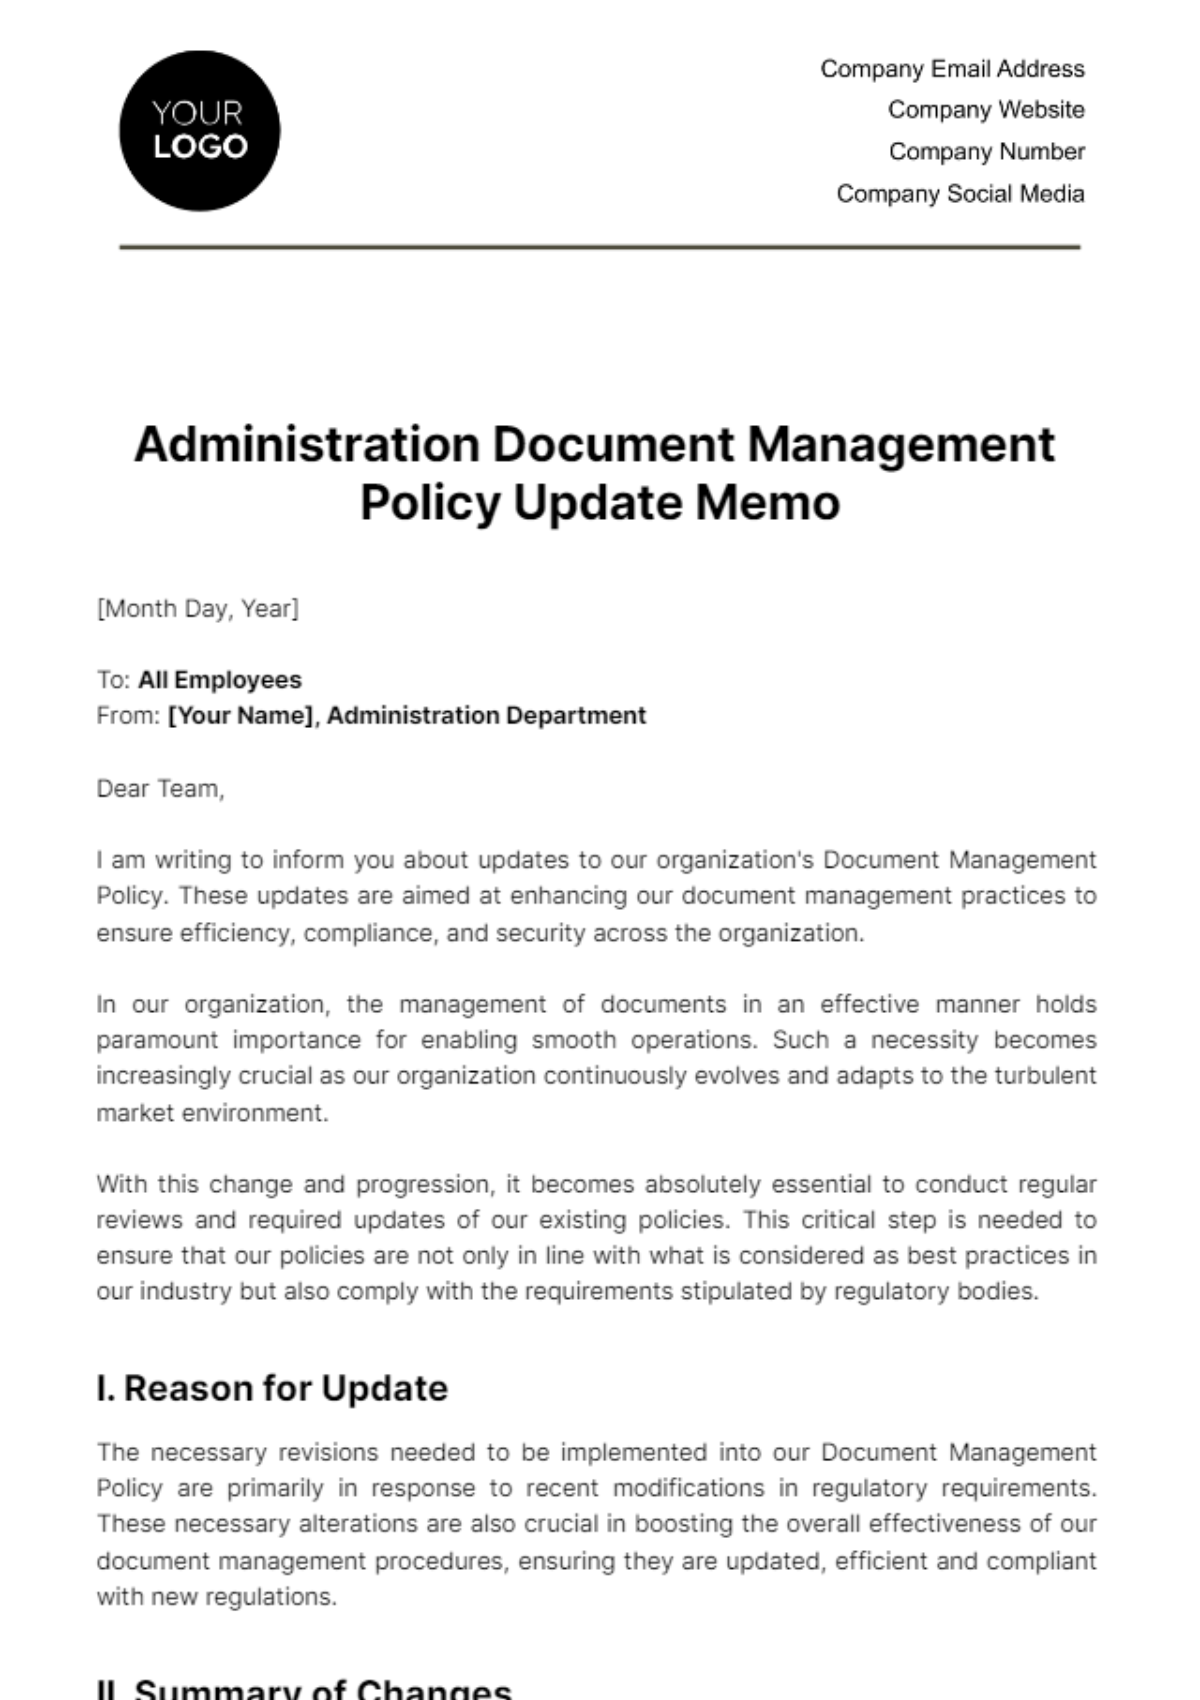 Administration Document Management Policy Update Memo Template